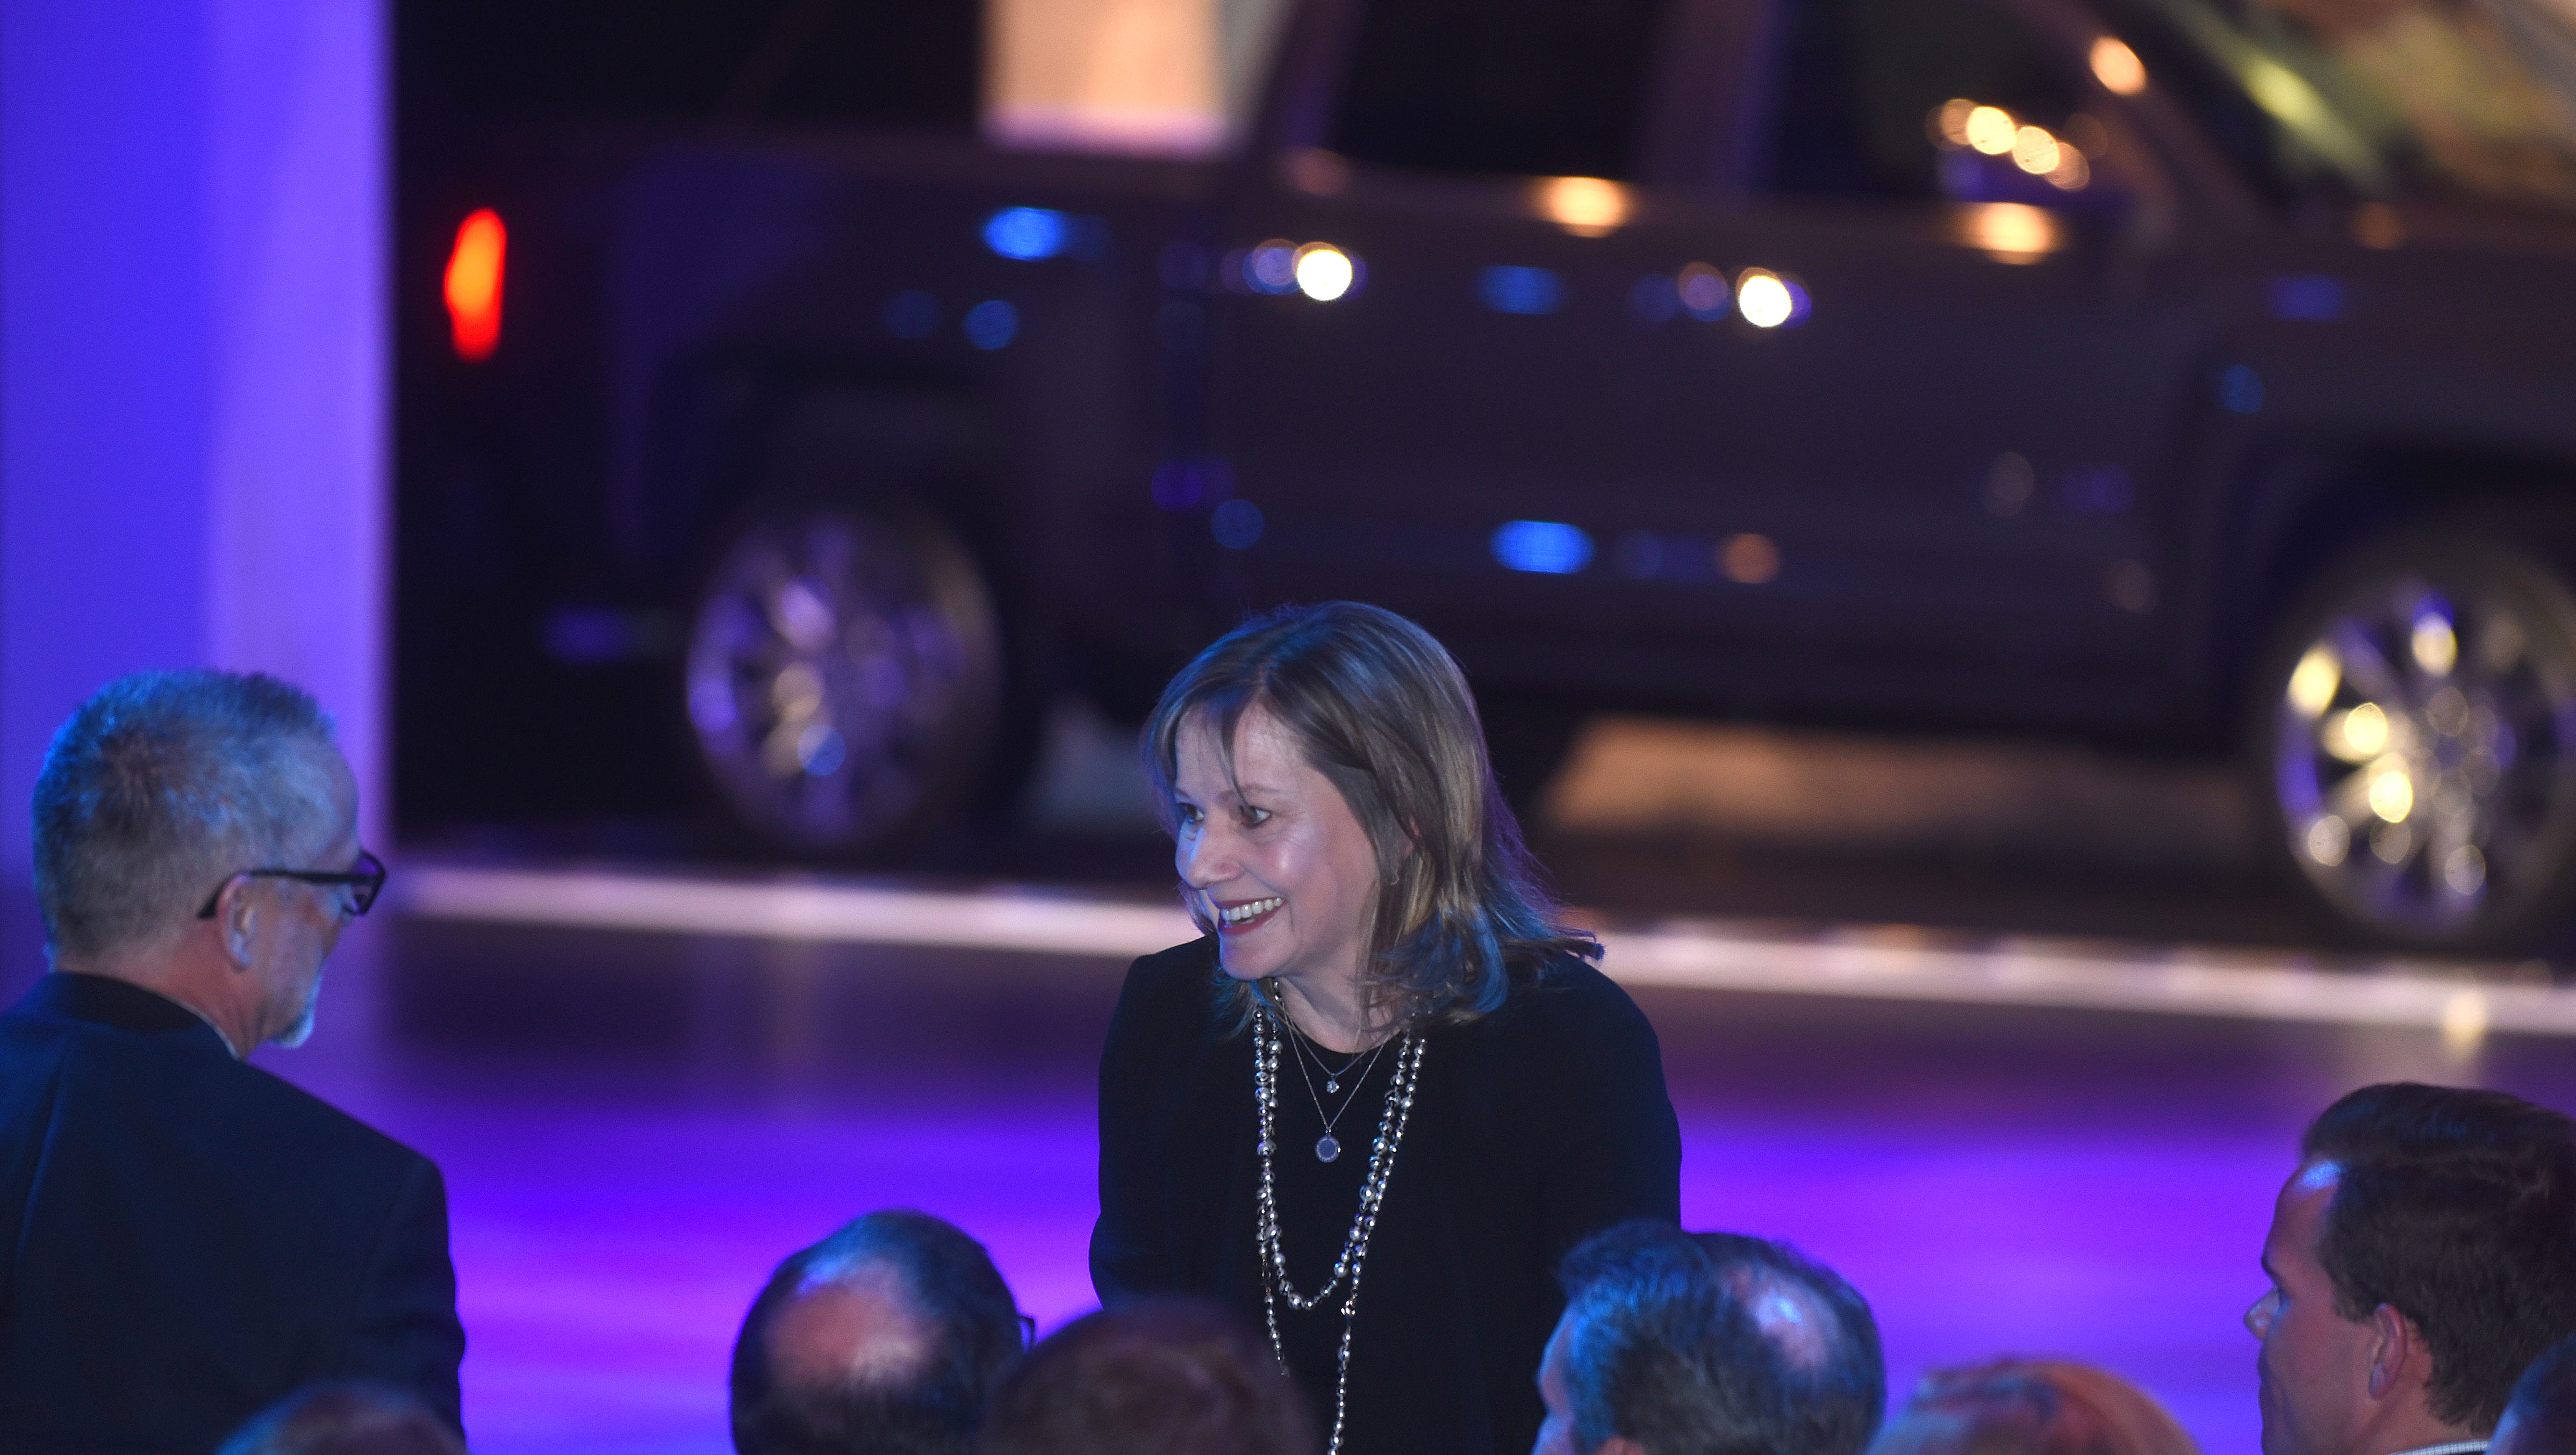 General Motors CEO Mary Barra was on hand to unveil the 2019 Chevy Silverado trucks at Eastern Market's Shed 3 in Detroit.